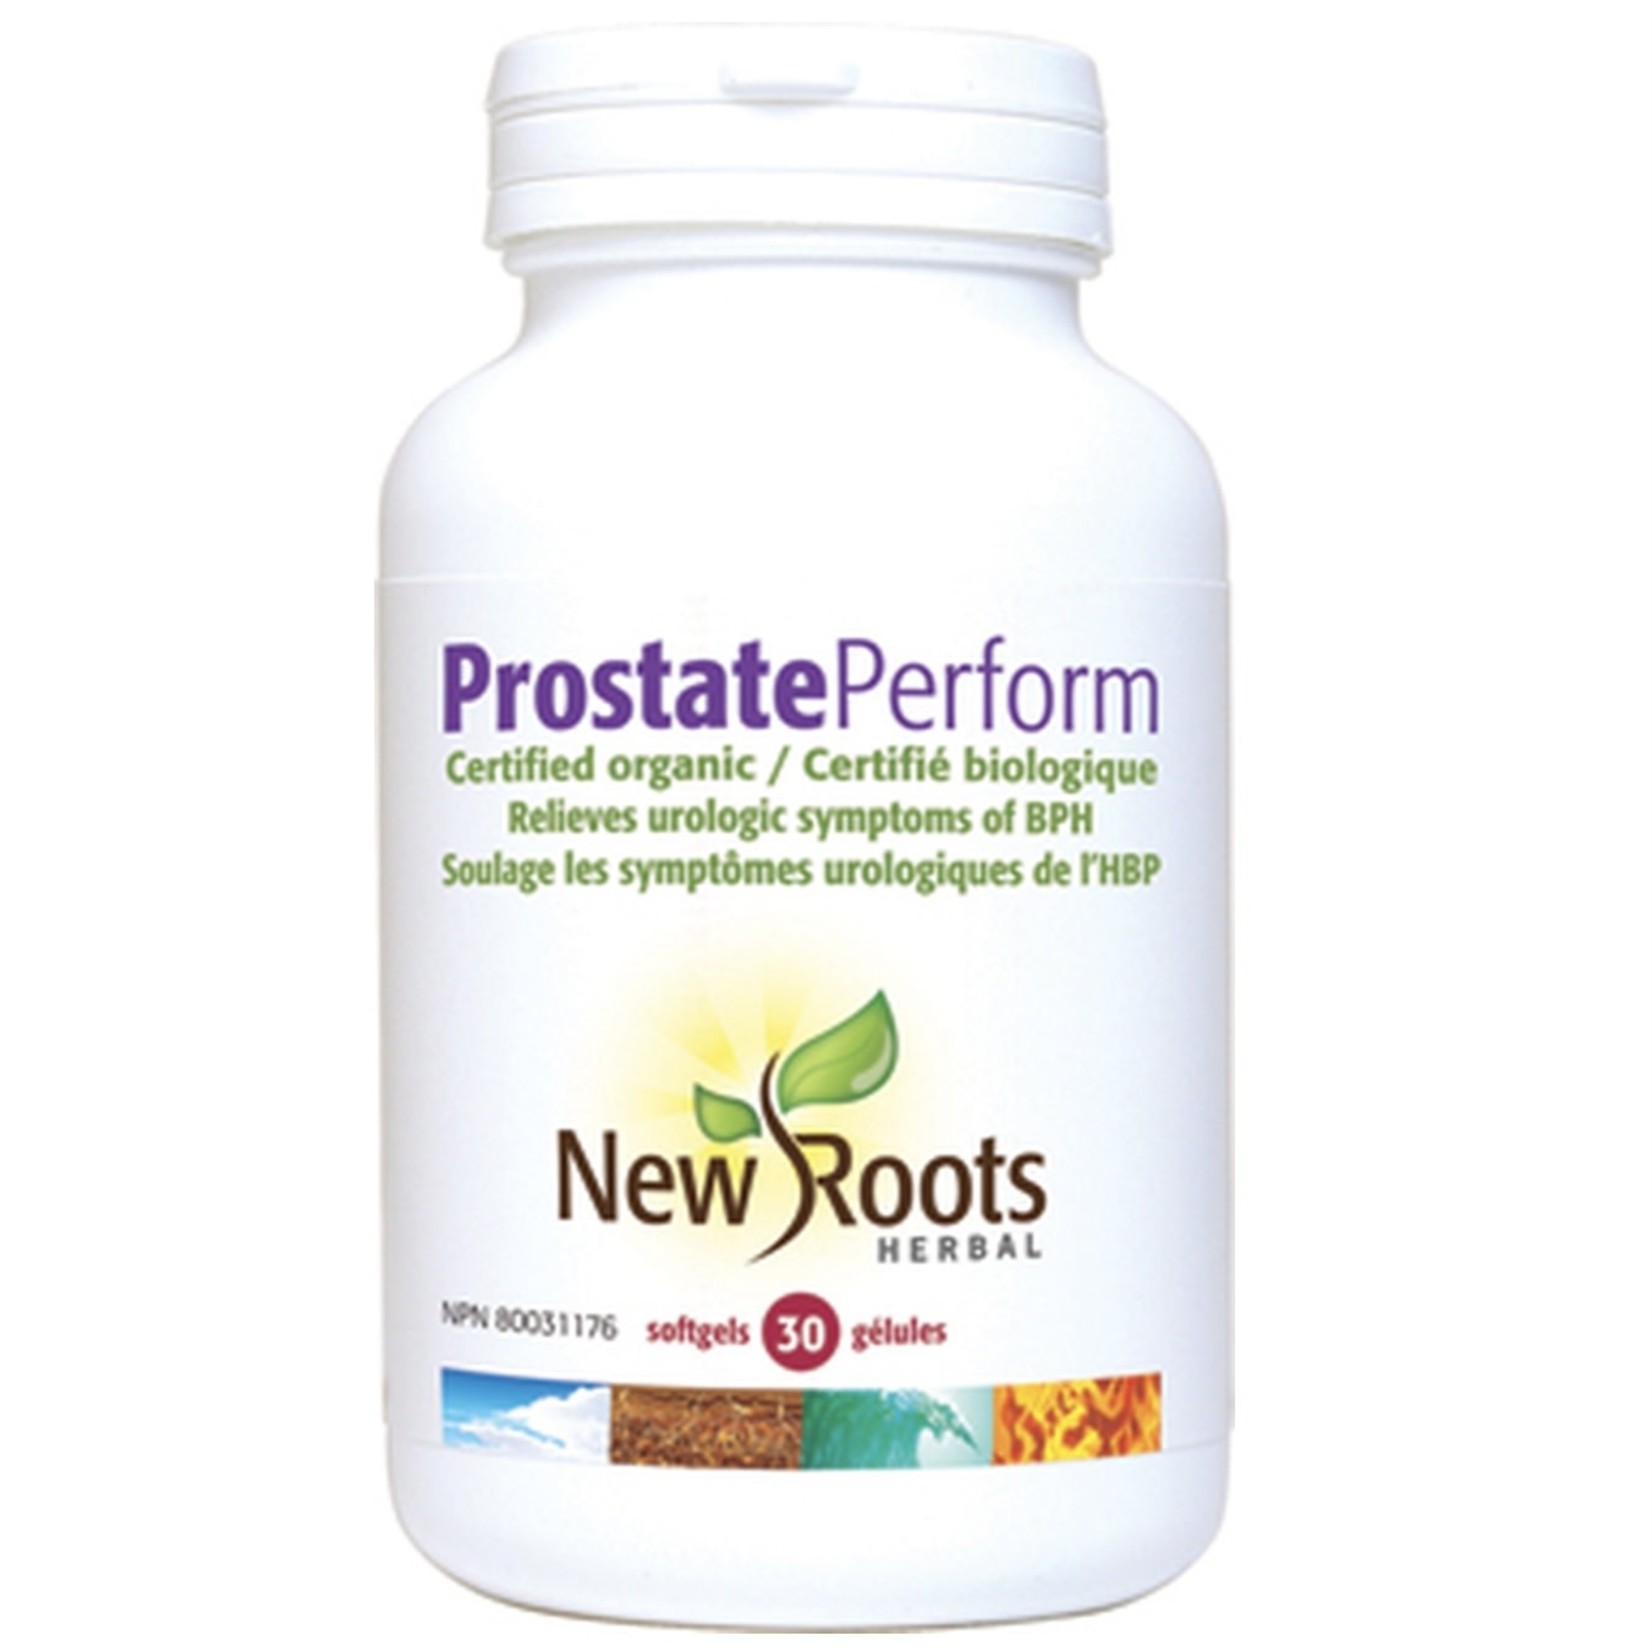 New Roots New Roots Prostate Perform 30 softgels